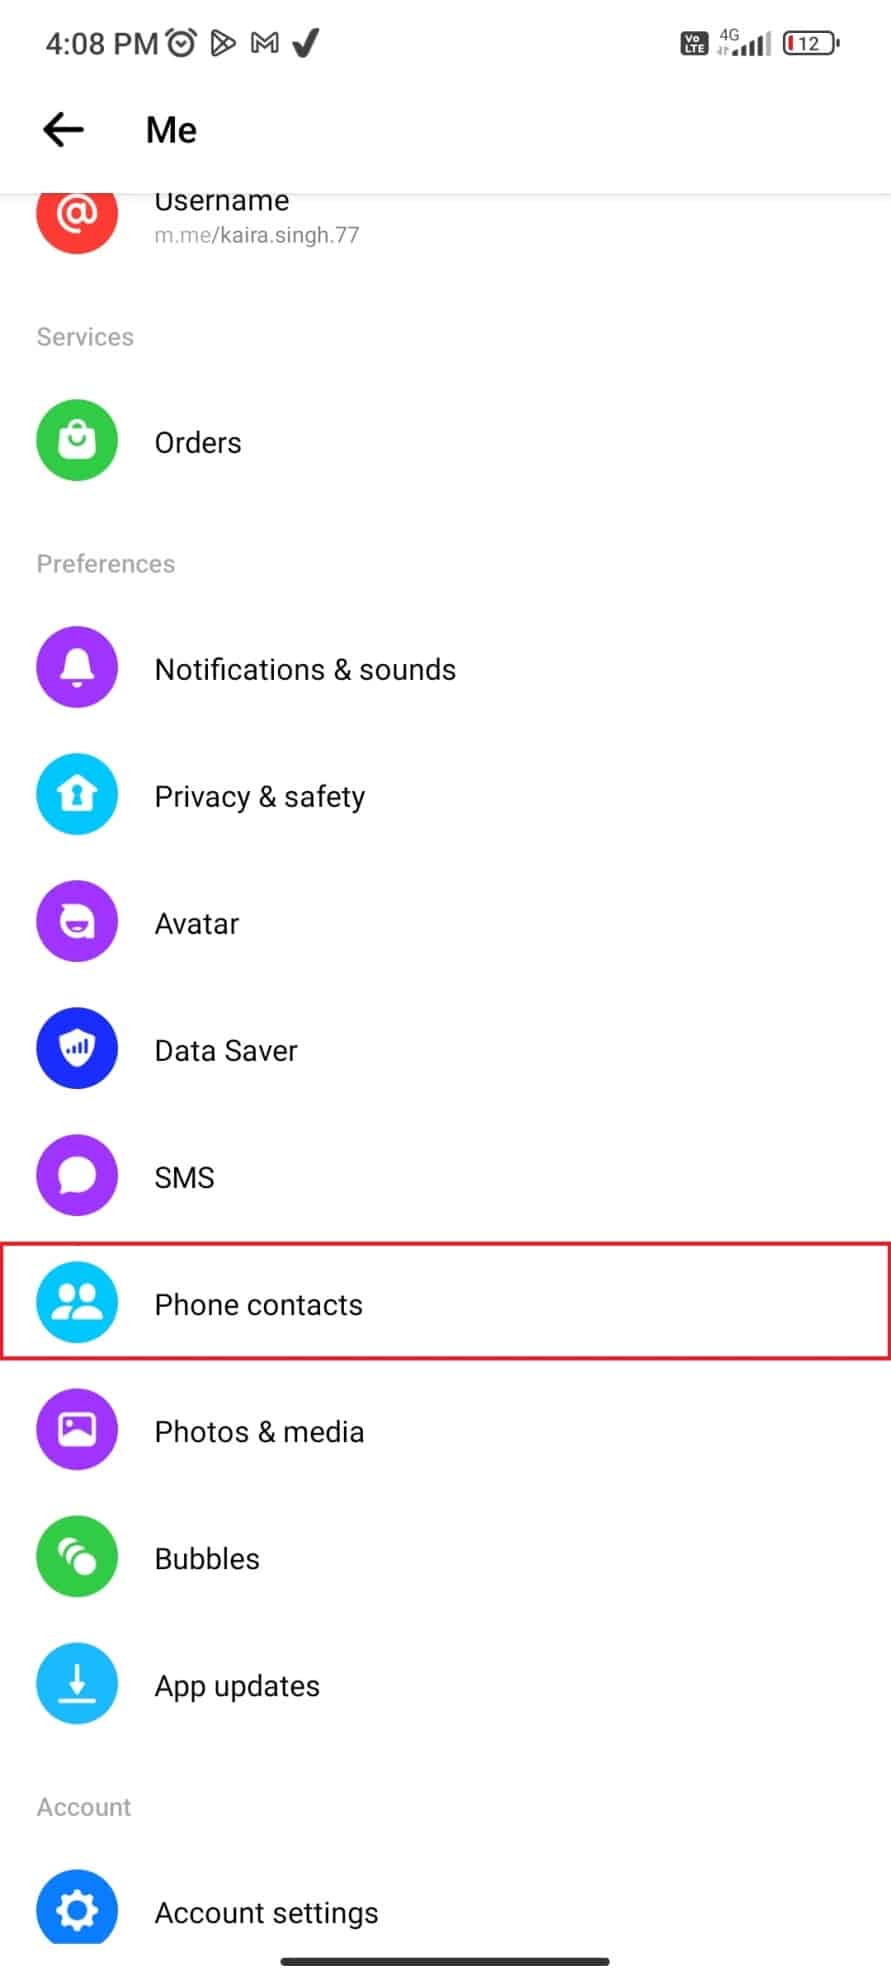 Scroll down to tap on Phone contacts